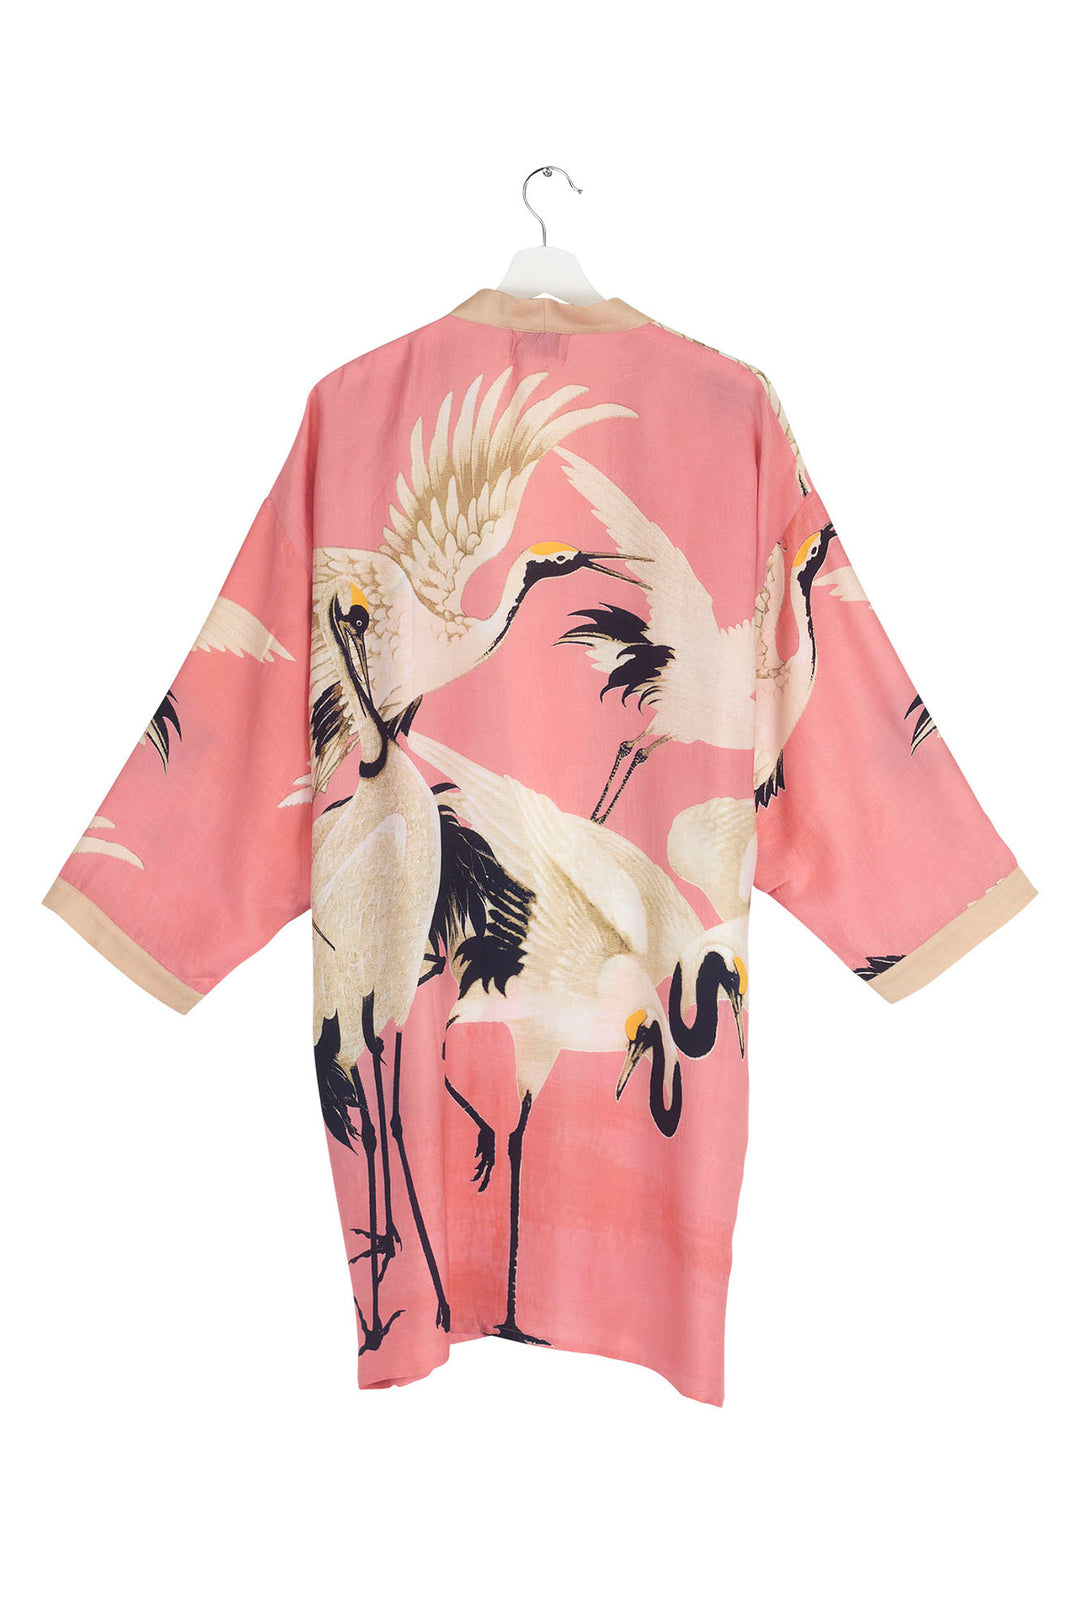 One Hundred Stars Stork Crane Lipstick Pink Collar Kimono - Our collar kimonos have a stylish loose relaxed fit and easily add a pop of colour to your favourite outfit.  